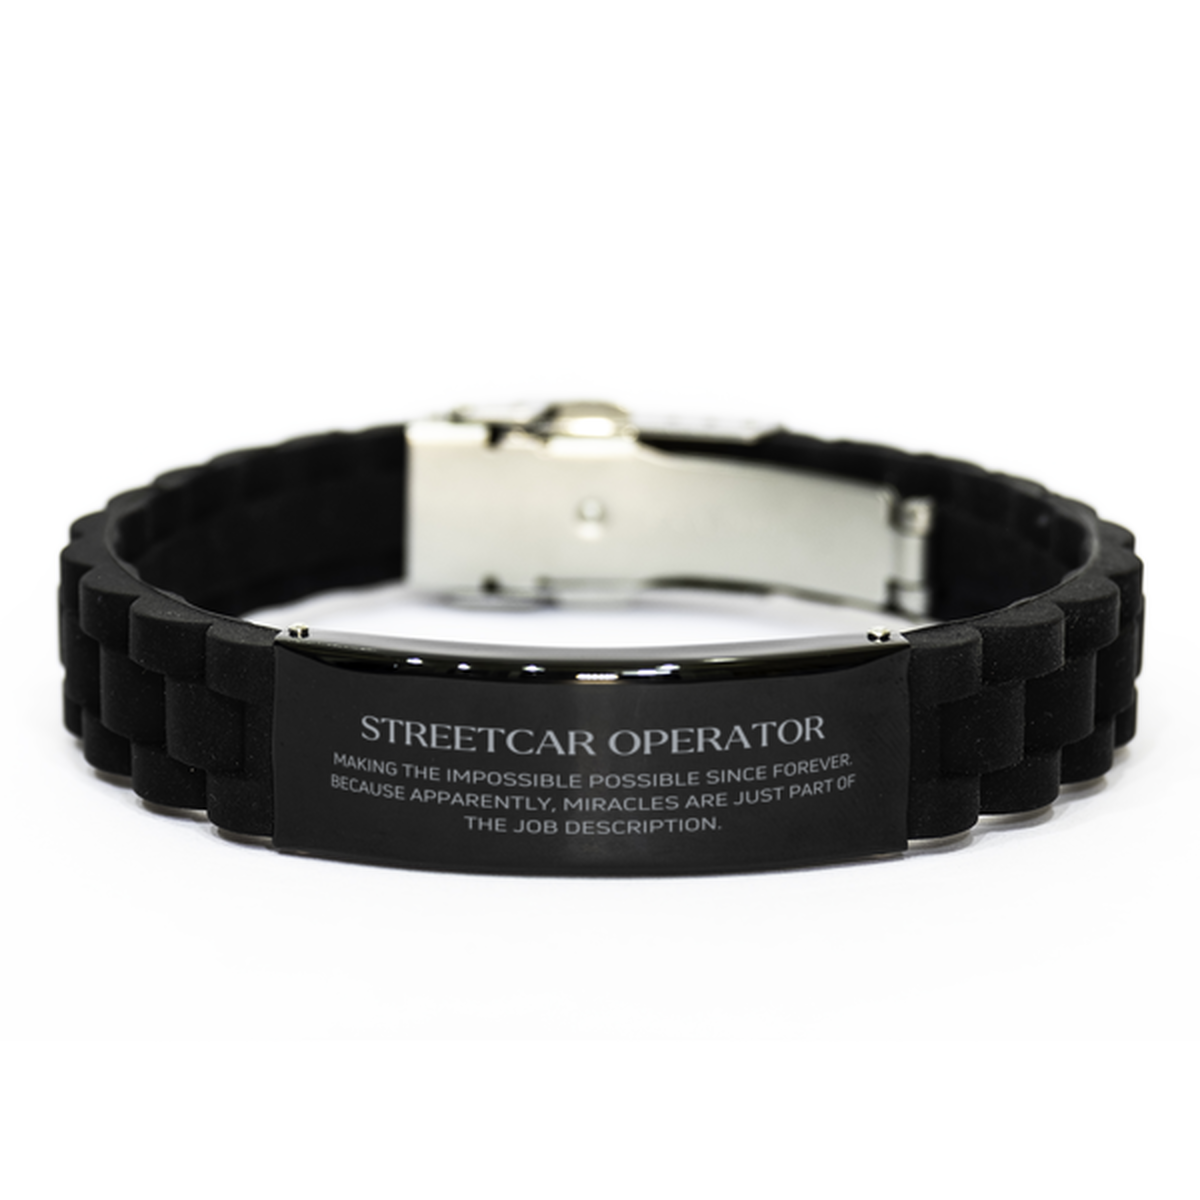 Funny Streetcar Operator Gifts, Miracles are just part of the job description, Inspirational Birthday Black Glidelock Clasp Bracelet For Streetcar Operator, Men, Women, Coworkers, Friends, Boss